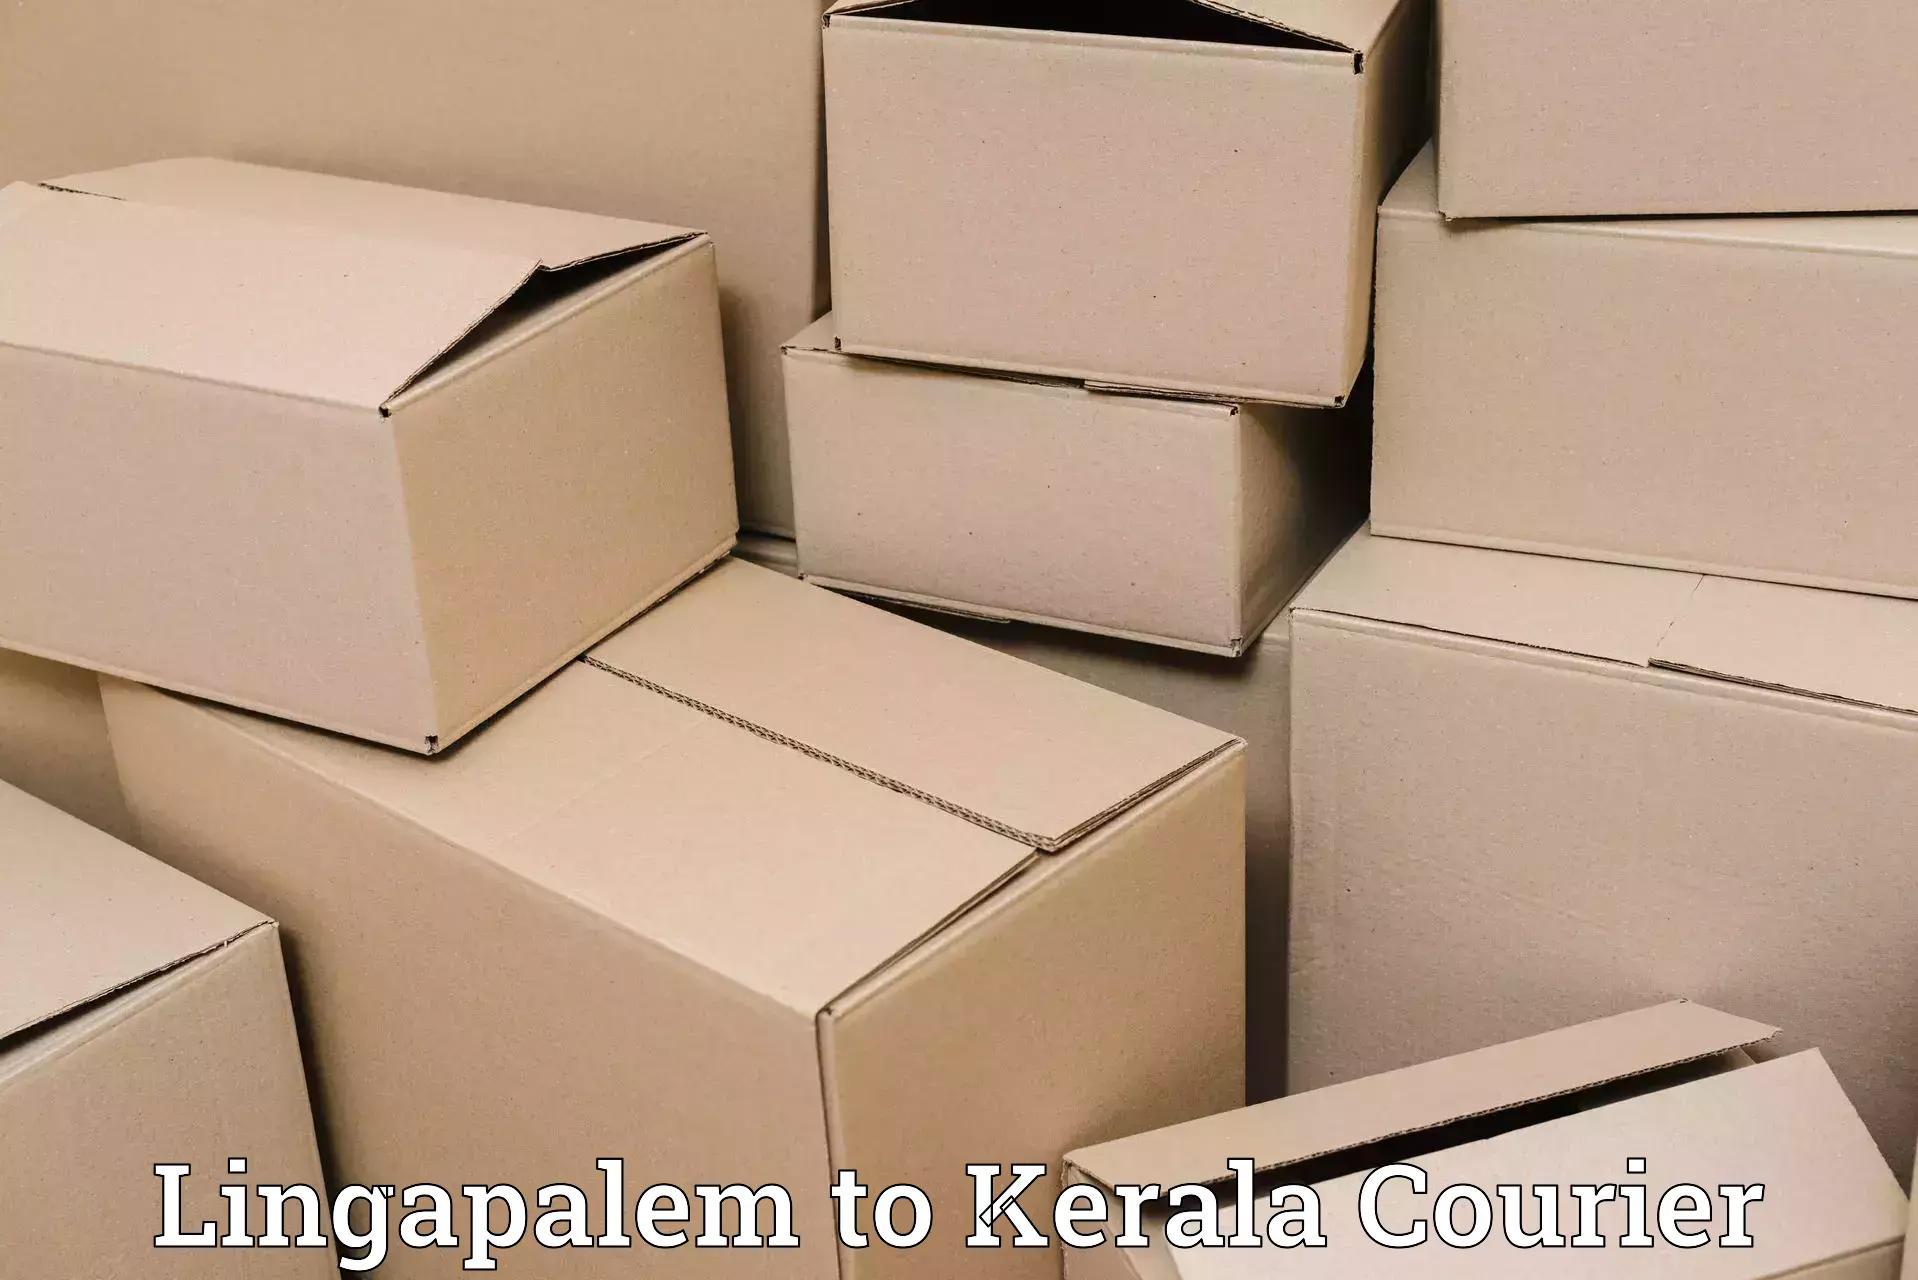 Expedited parcel delivery in Lingapalem to Kuttikol